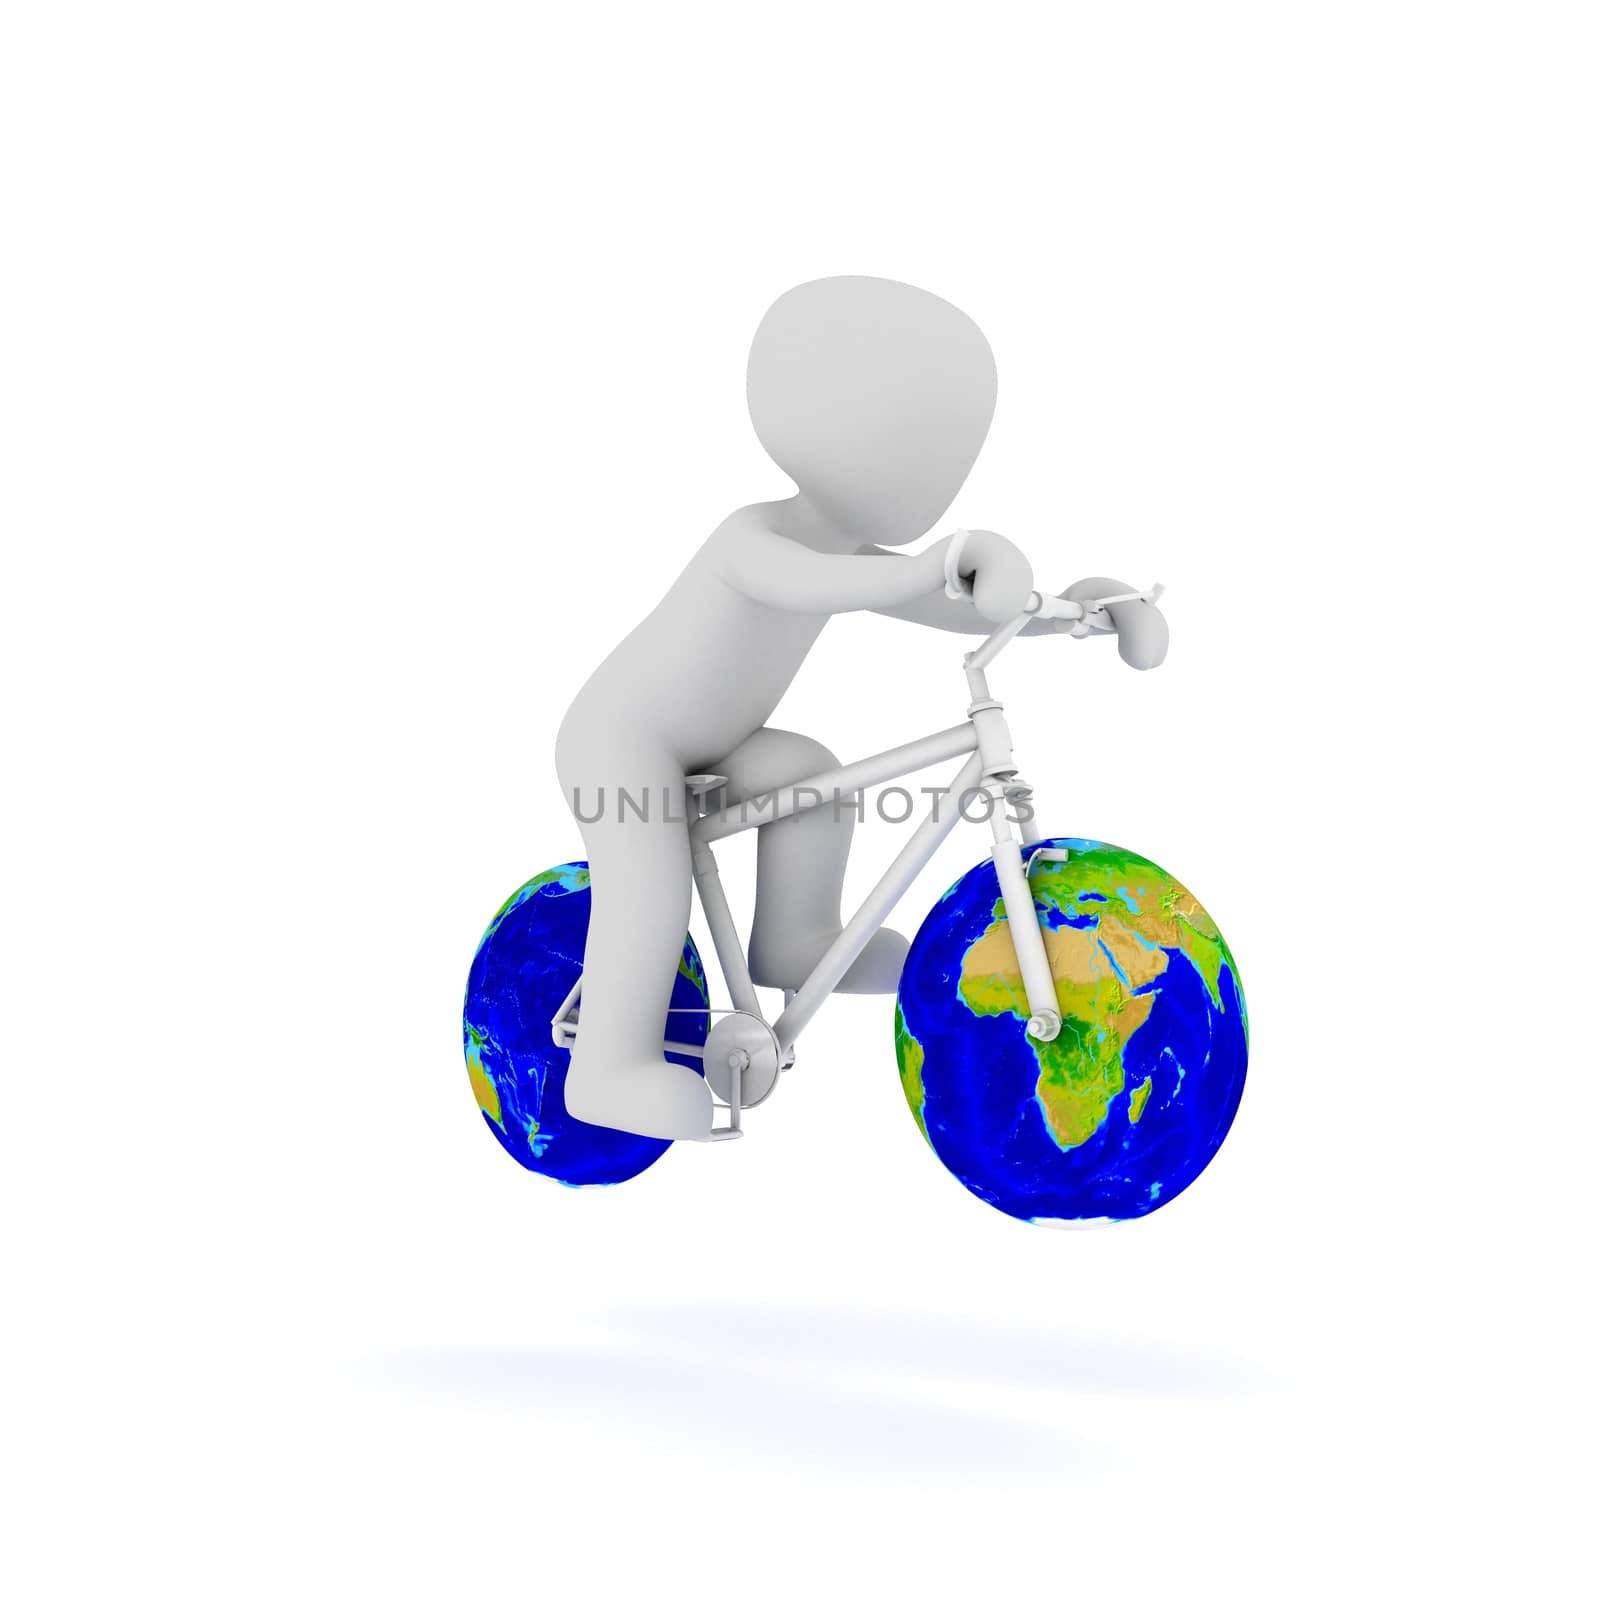 The world bike is a bike with world landscapes on the wheels.